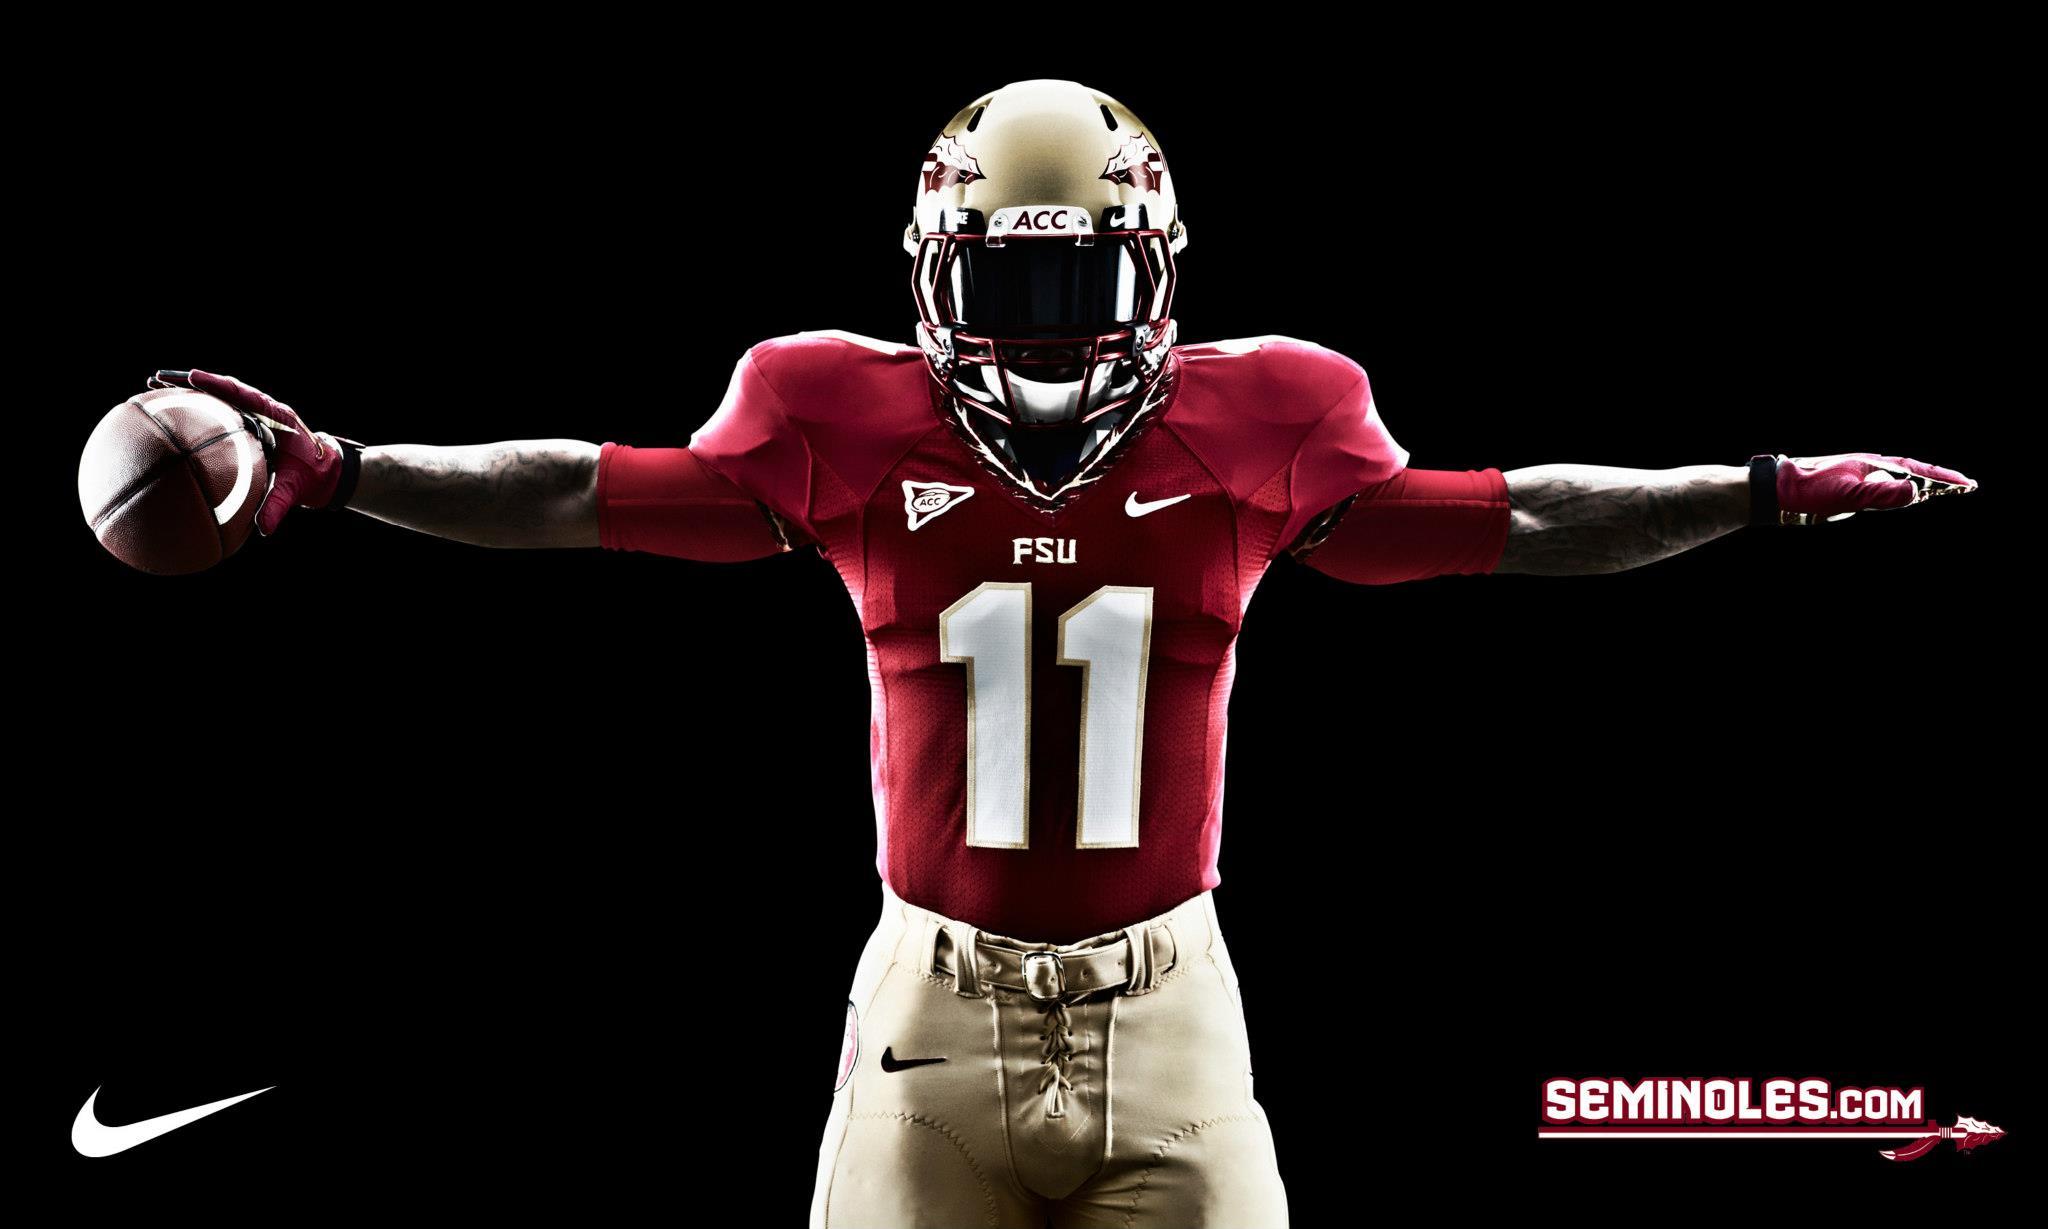 image about Florida State Seminoles Themes